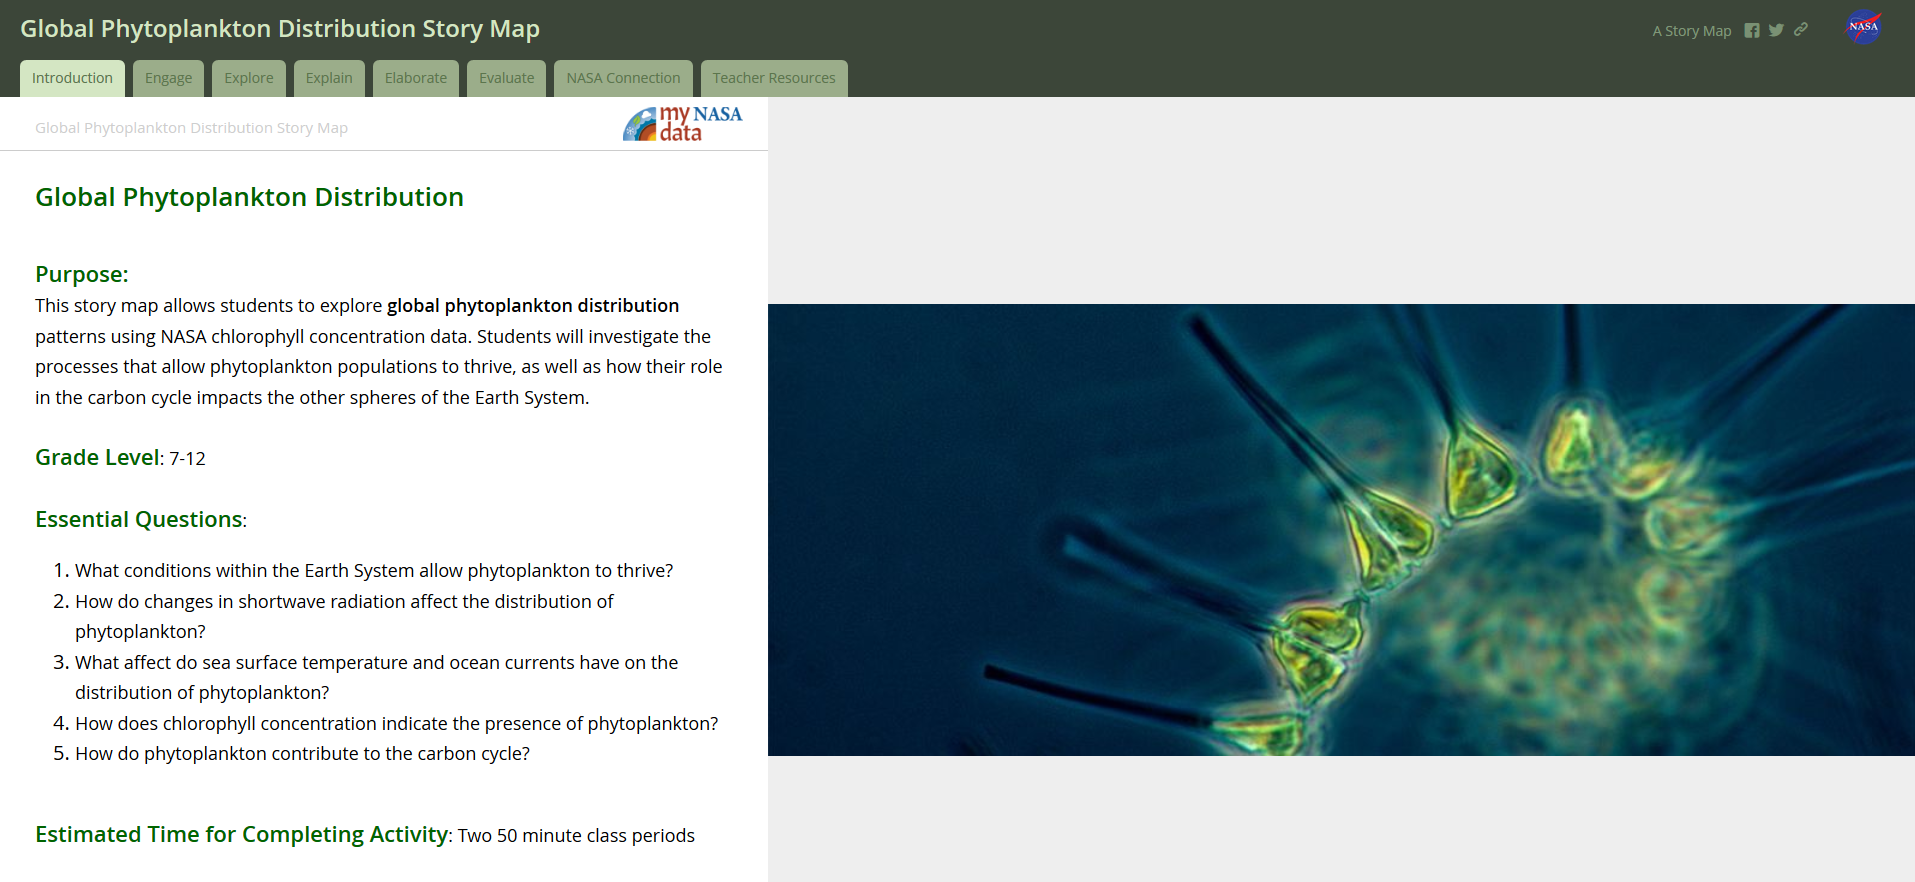 Phytoplankton Story Map Introduction Page